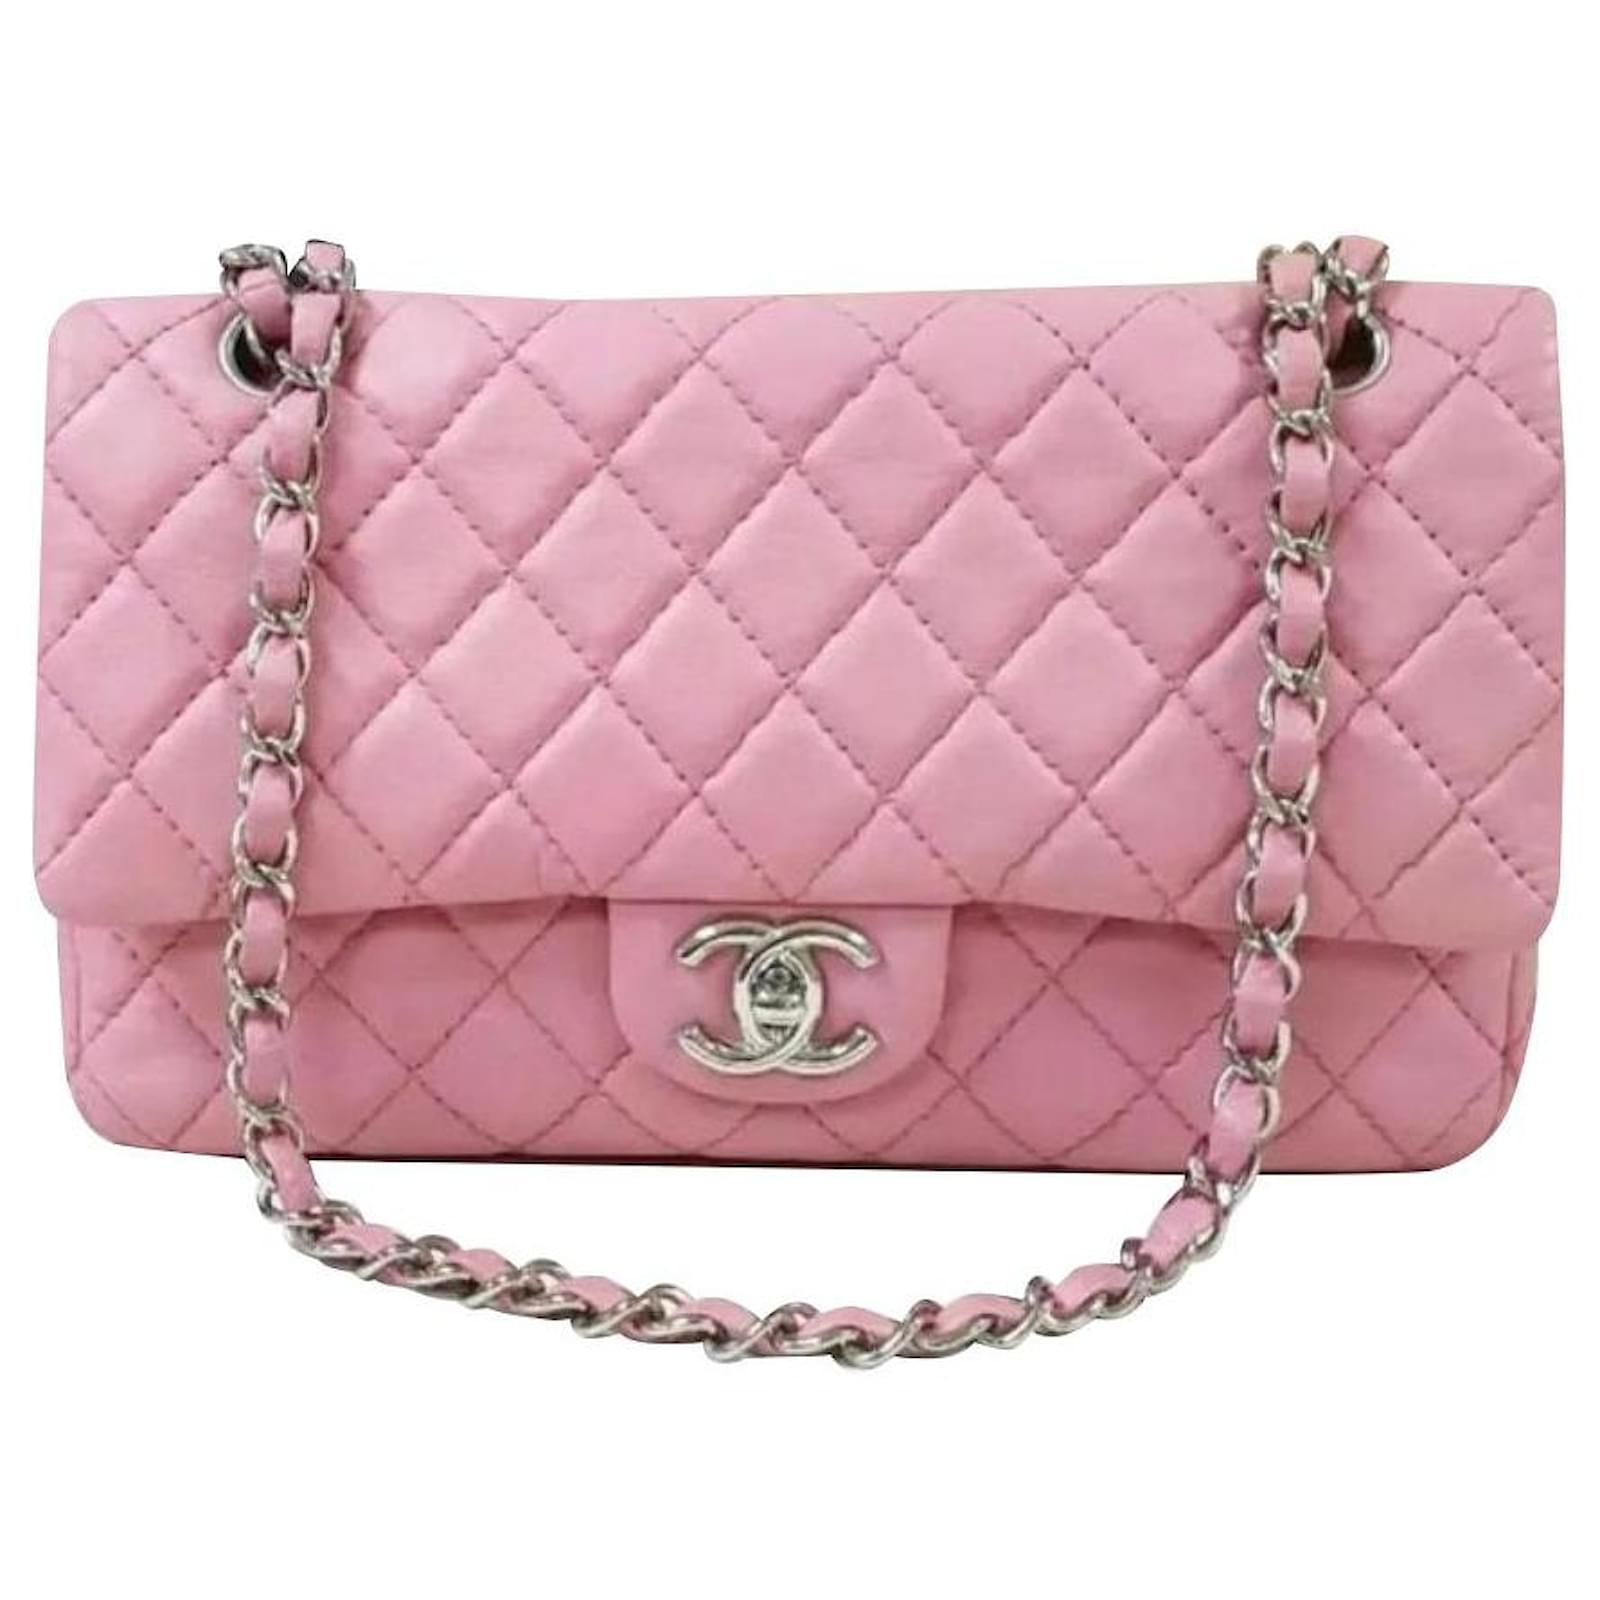 Chanel Vintage Pink Caviar lined Flap Bag Leather ref.857773